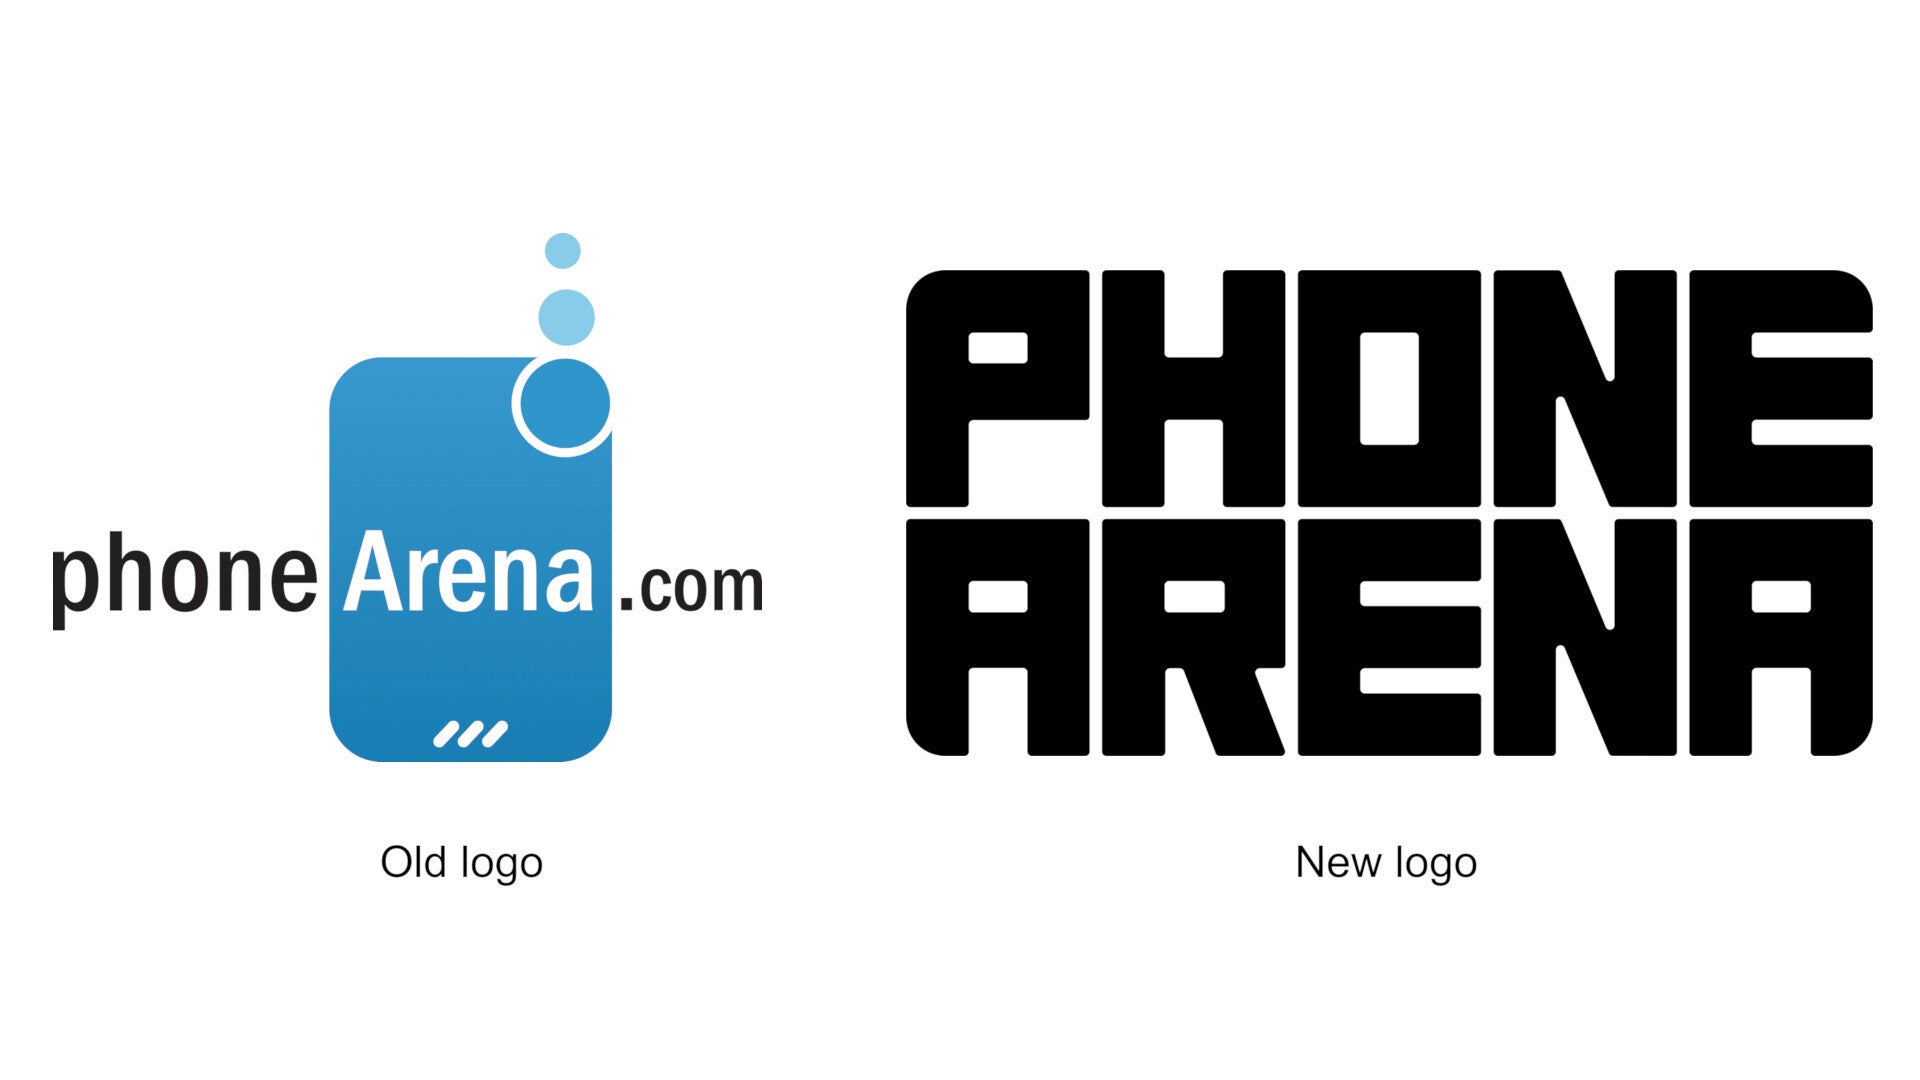 Welcome to a brand new PhoneArena